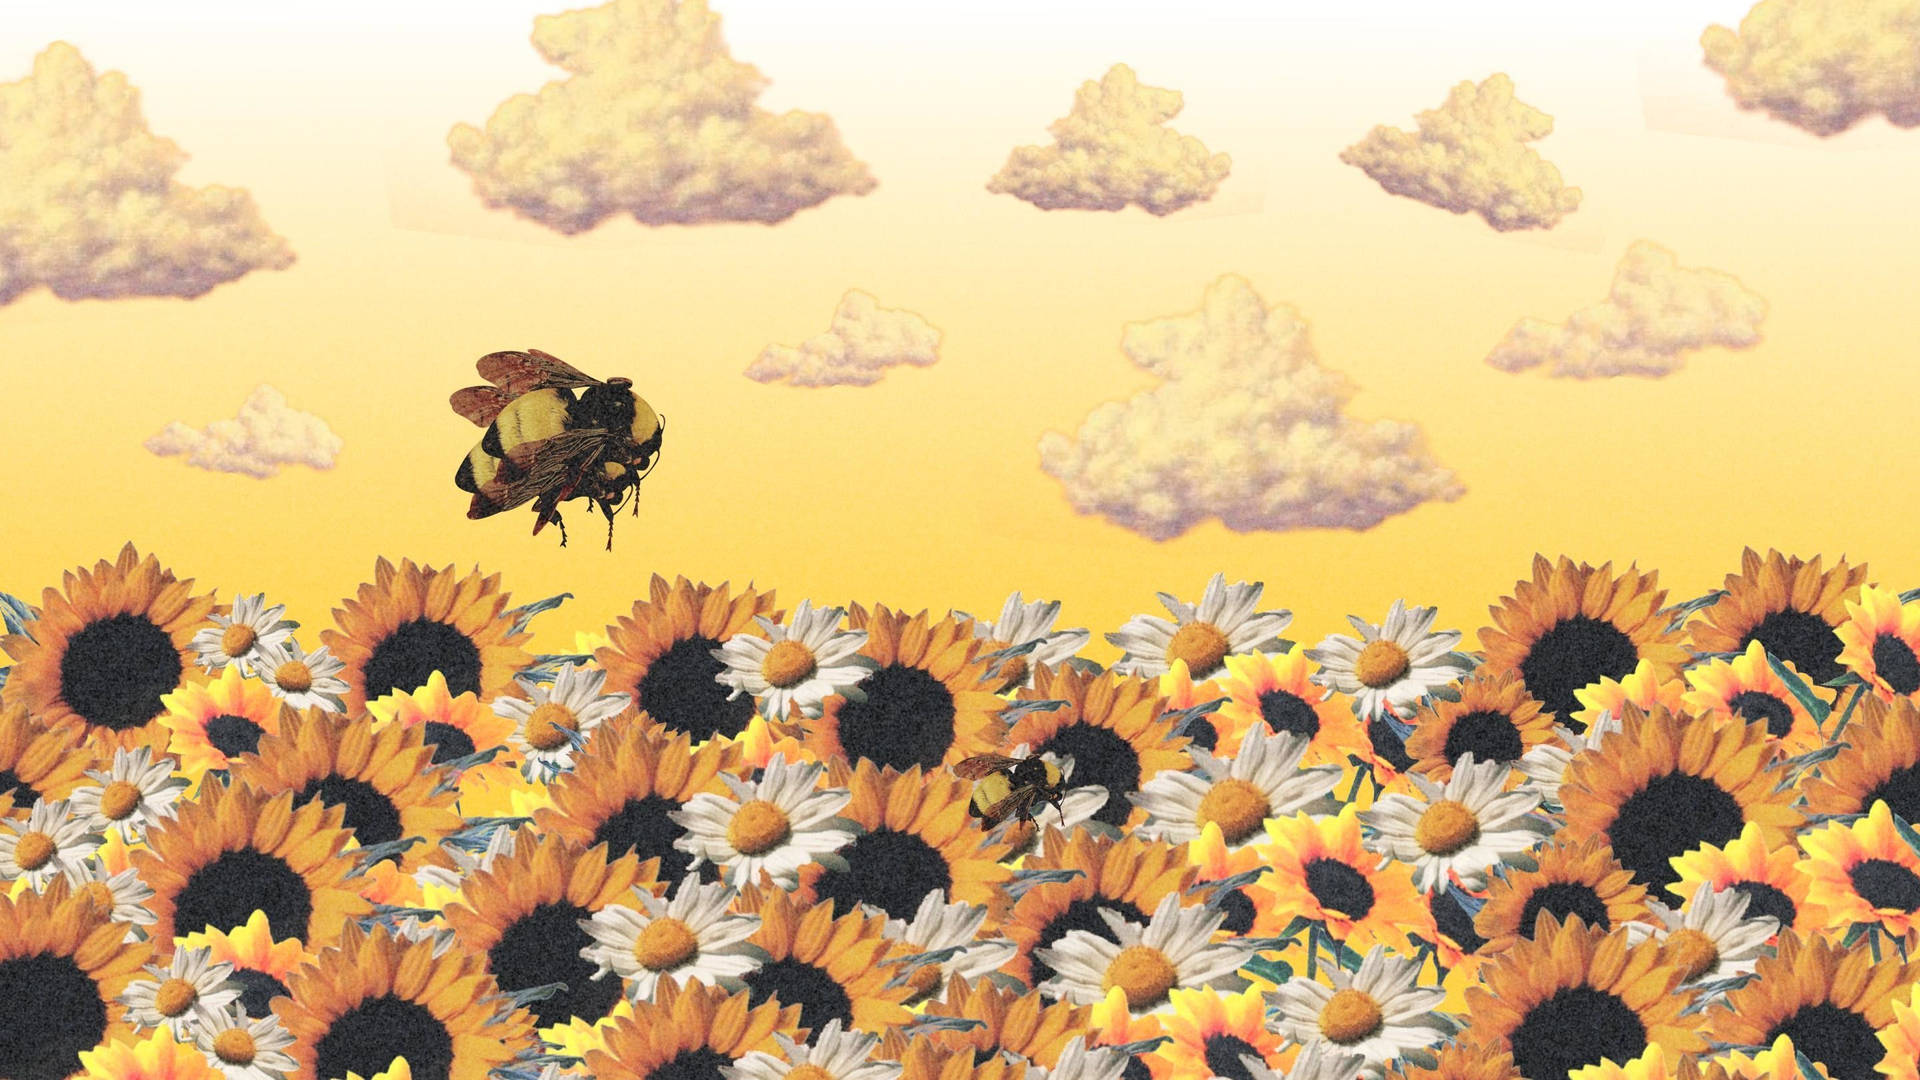 Cartoon Bee Over A Field Of Sunflowers Background